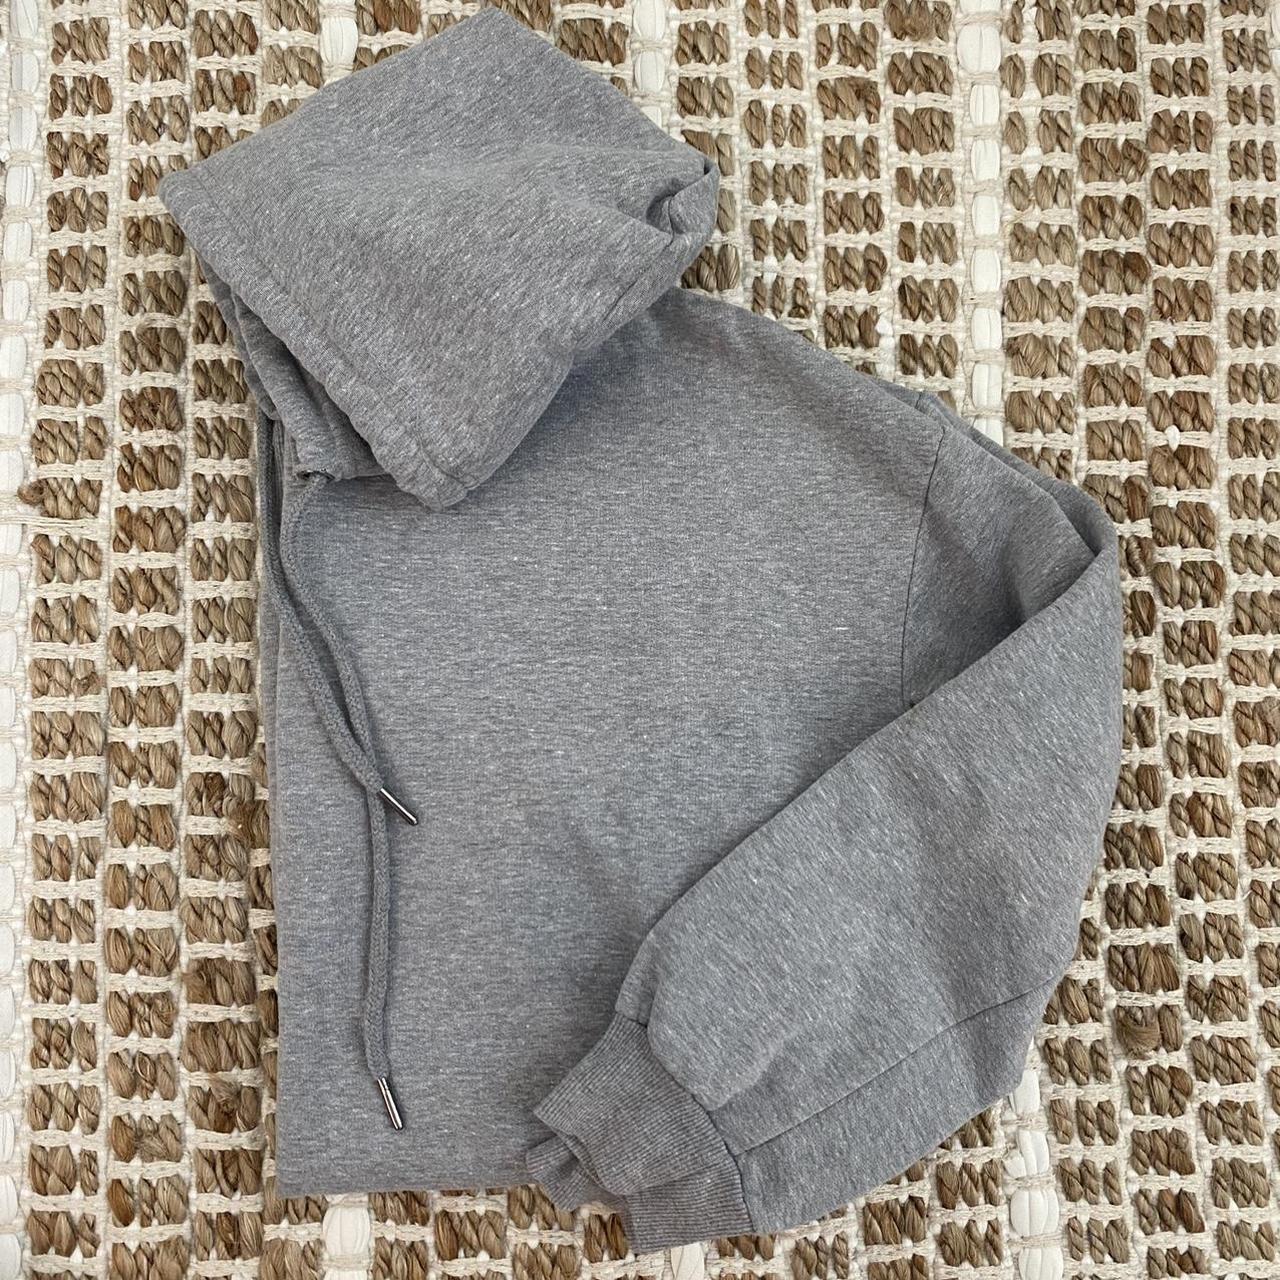 Product Image 2 - oversized grey hoodie dress

tag says